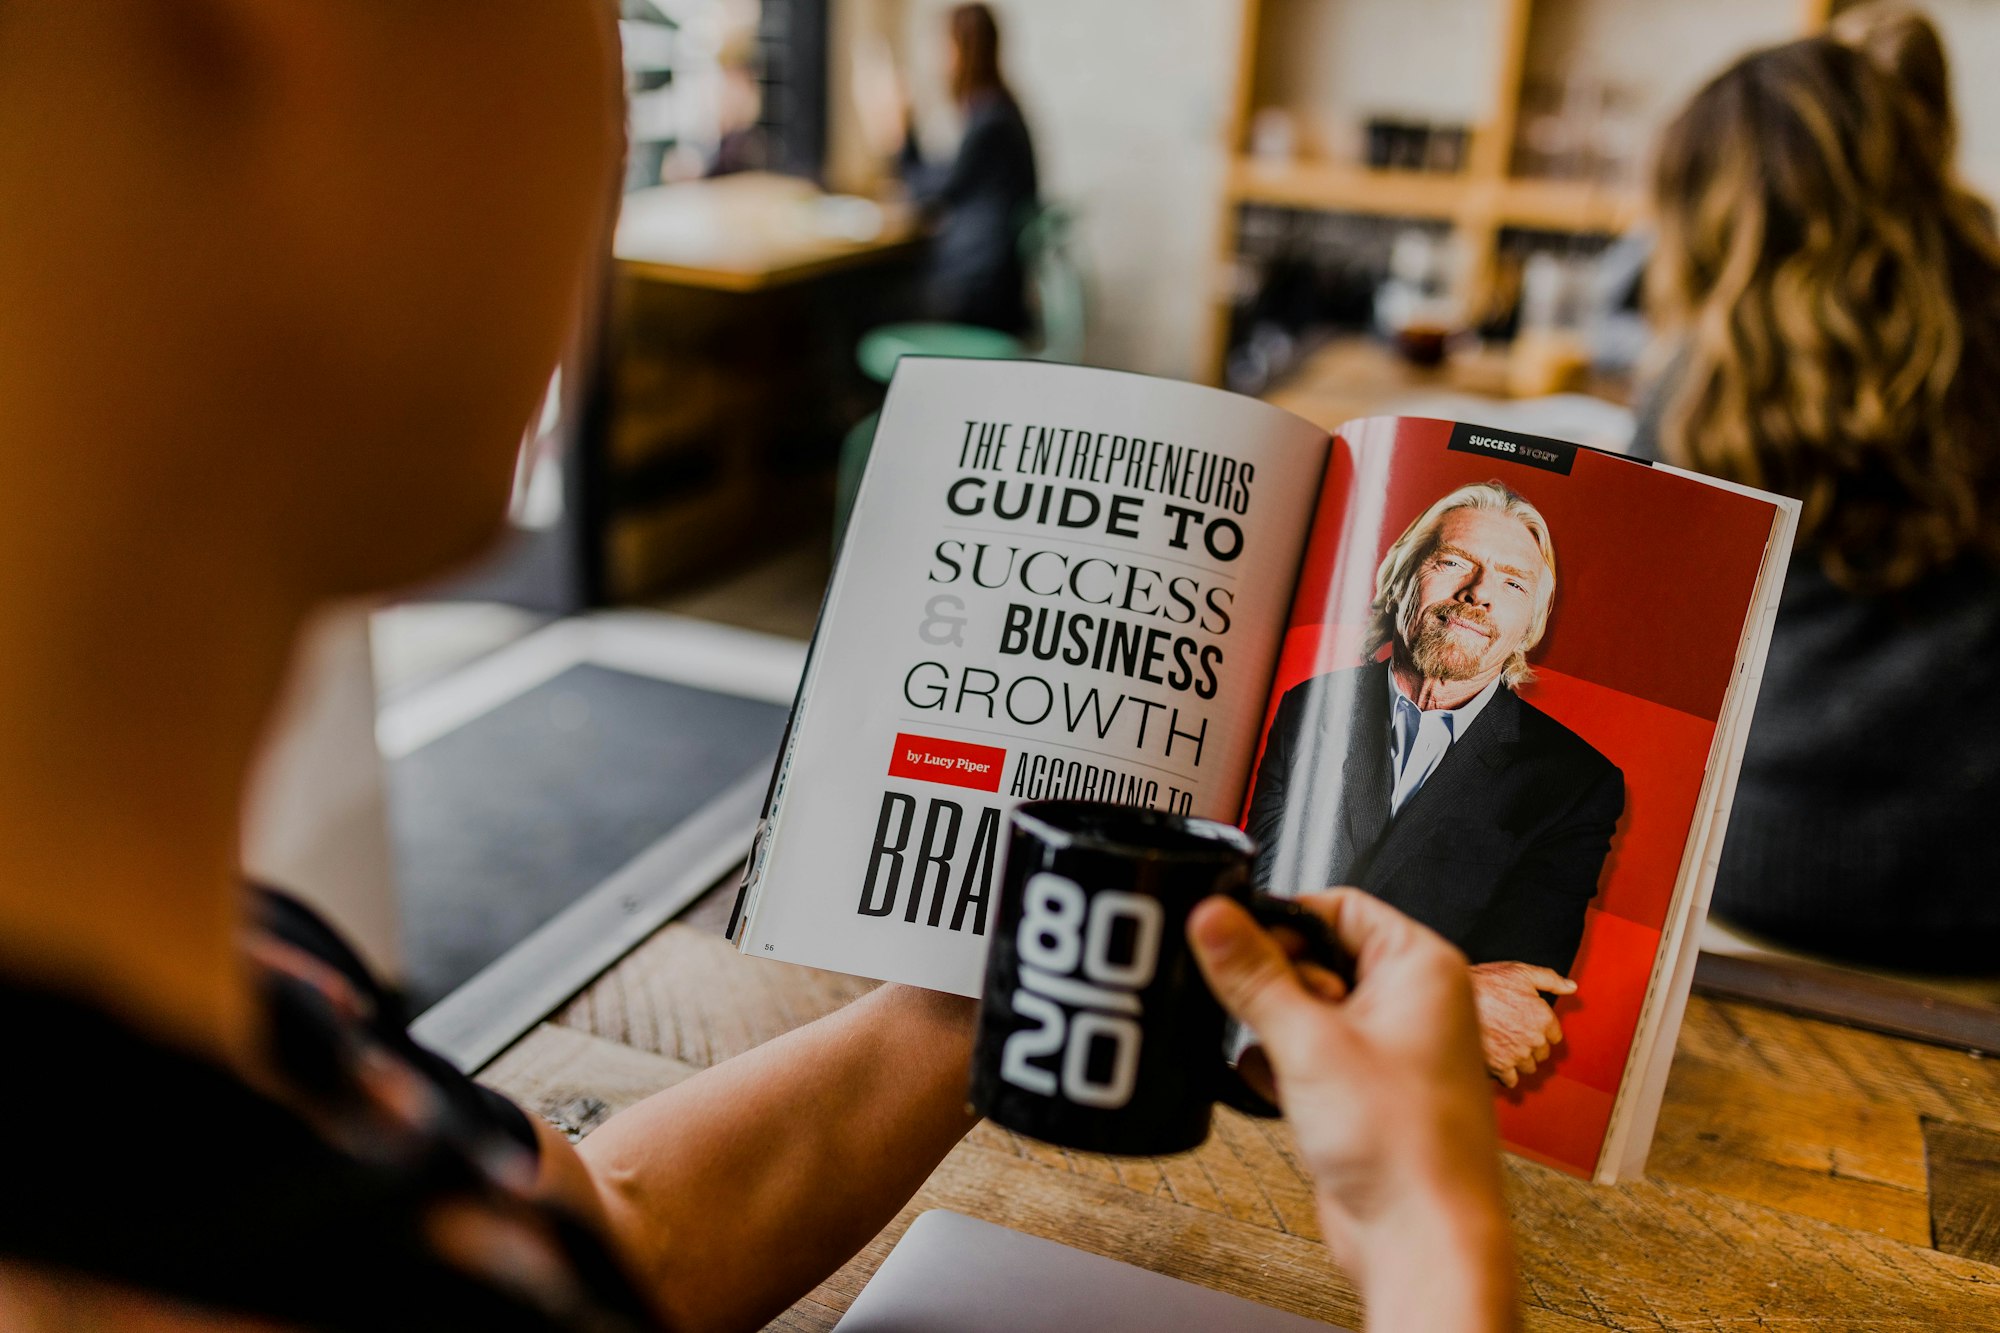 someone reading a book on entrepreneurship and success, holding a coffee mug reading "80/20"